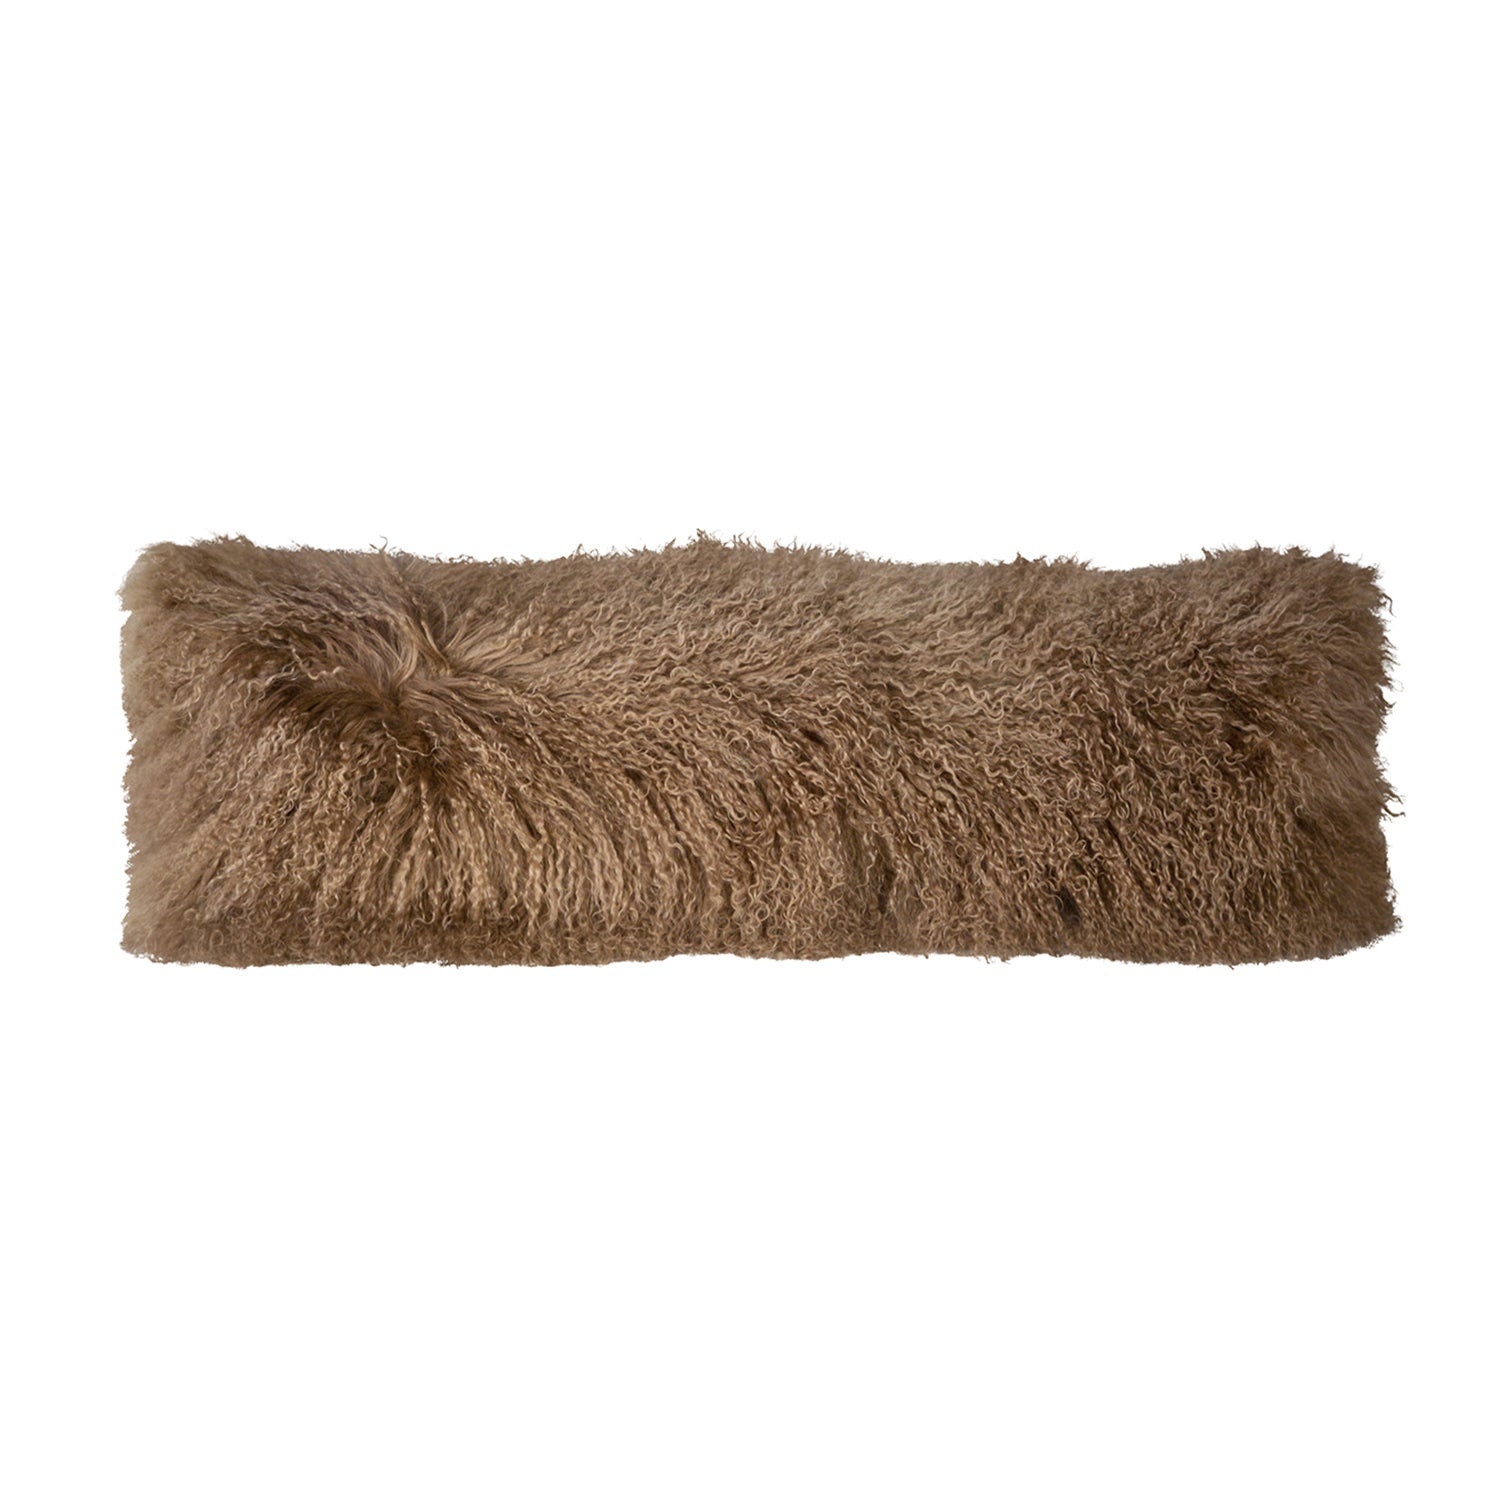 With its unrivaled softness and luxurious lamb fur, this 35x12" pillow will become an instant statement piece. Featuring a lush texture in a beautiful light brown color, completed with a smooth suede back to create the perfect material mix. Pair with other colors and sizes from the same collection.Depth : 6 in Amethyst Home provides interior design, new home construction design consulting, vintage area rugs, and lighting in the Laguna Beach metro area.